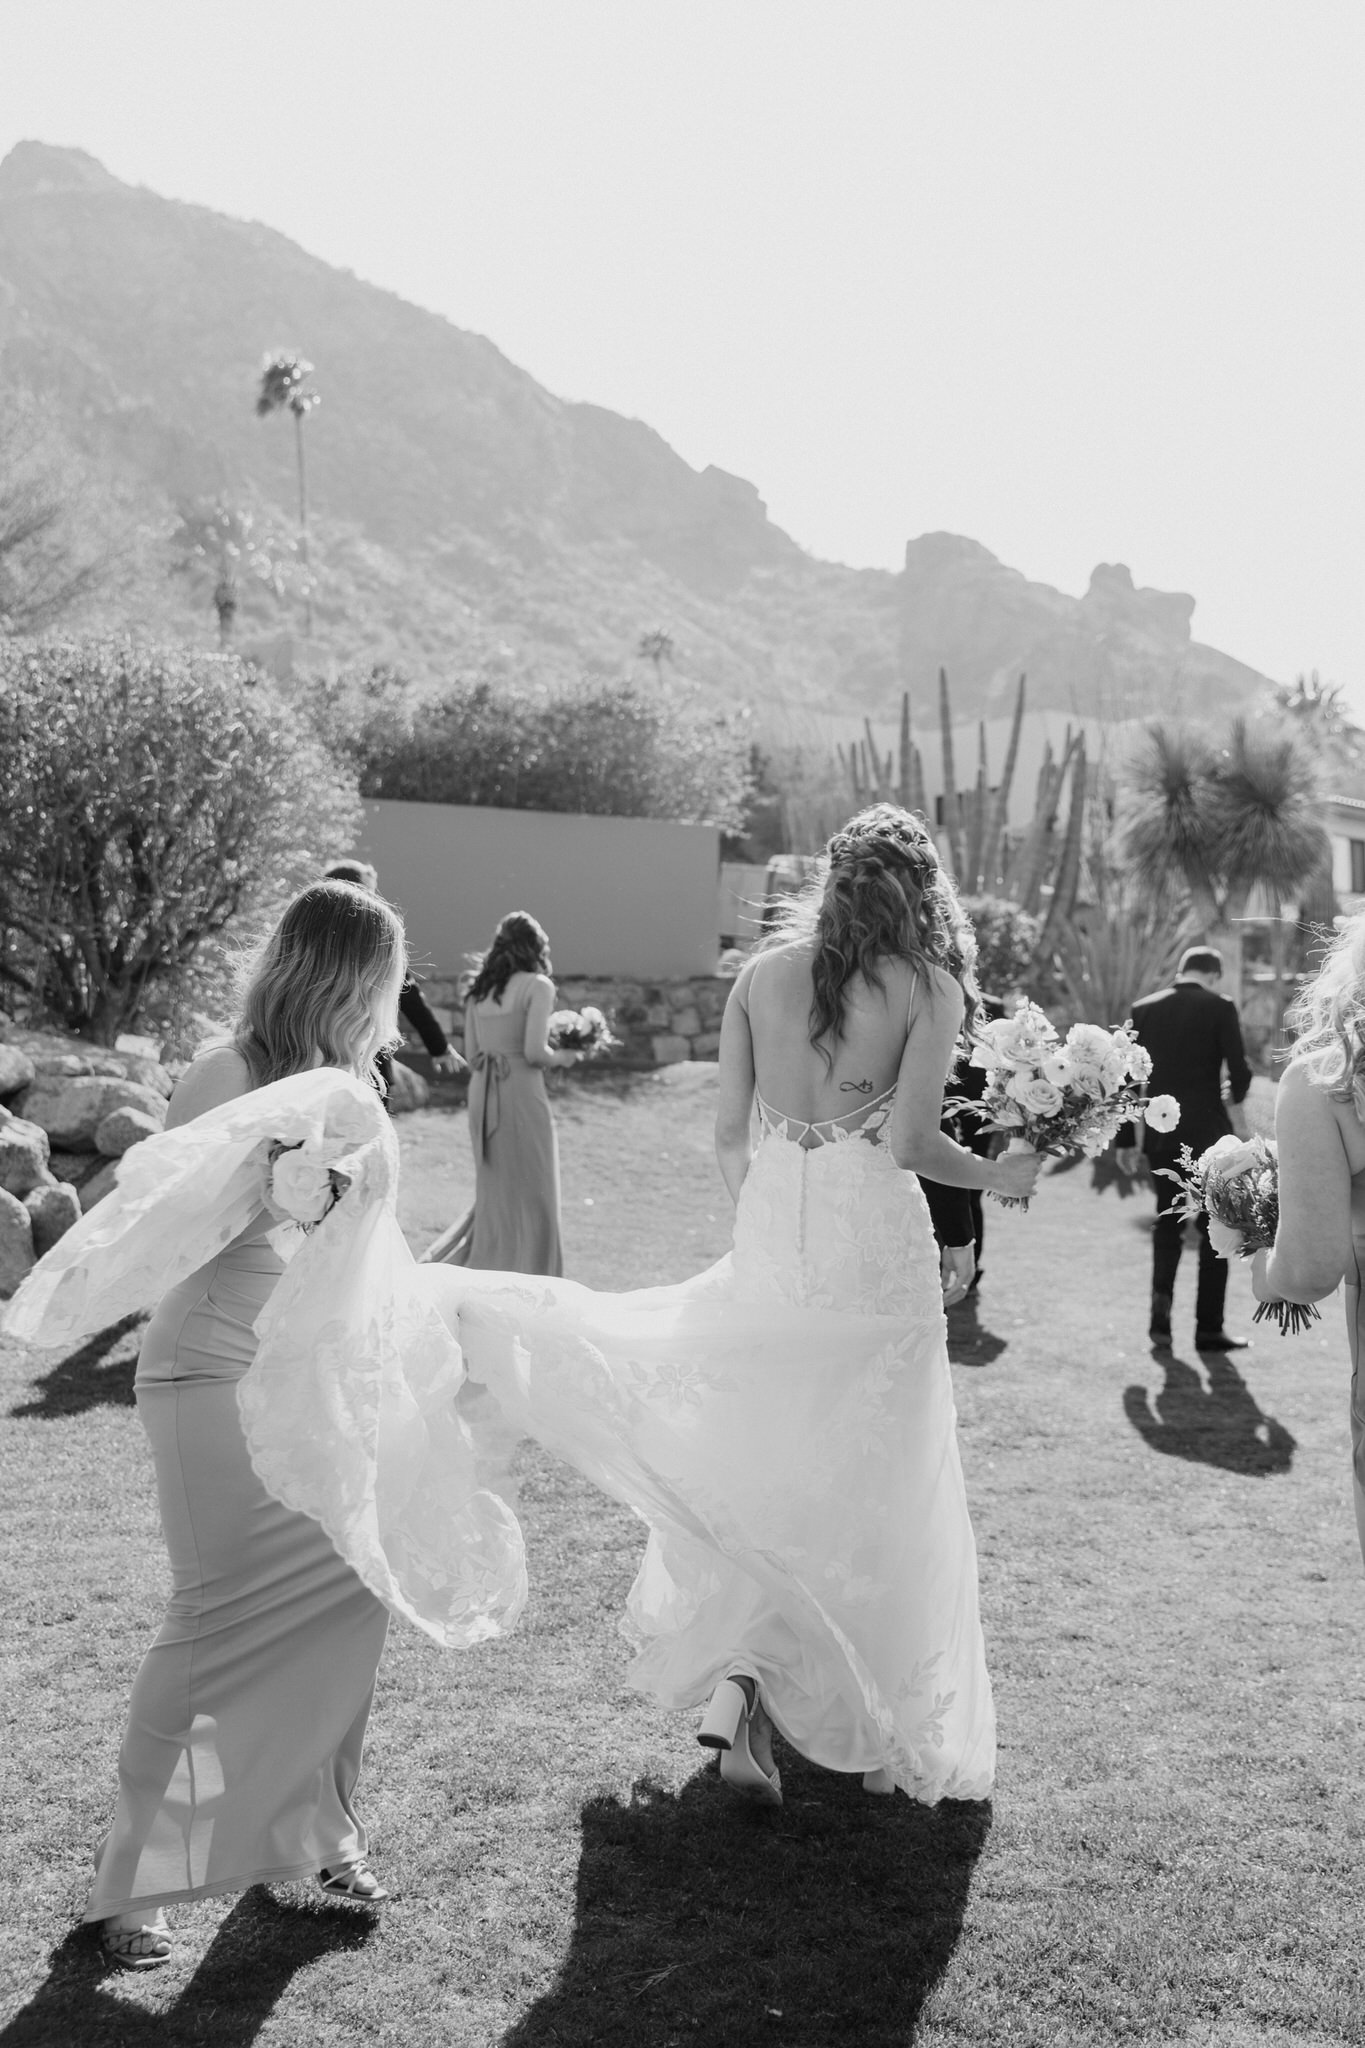 Bridesmaids walking and carrying bride's dress at the Sanctuary Camelback Mountain wedding venue.